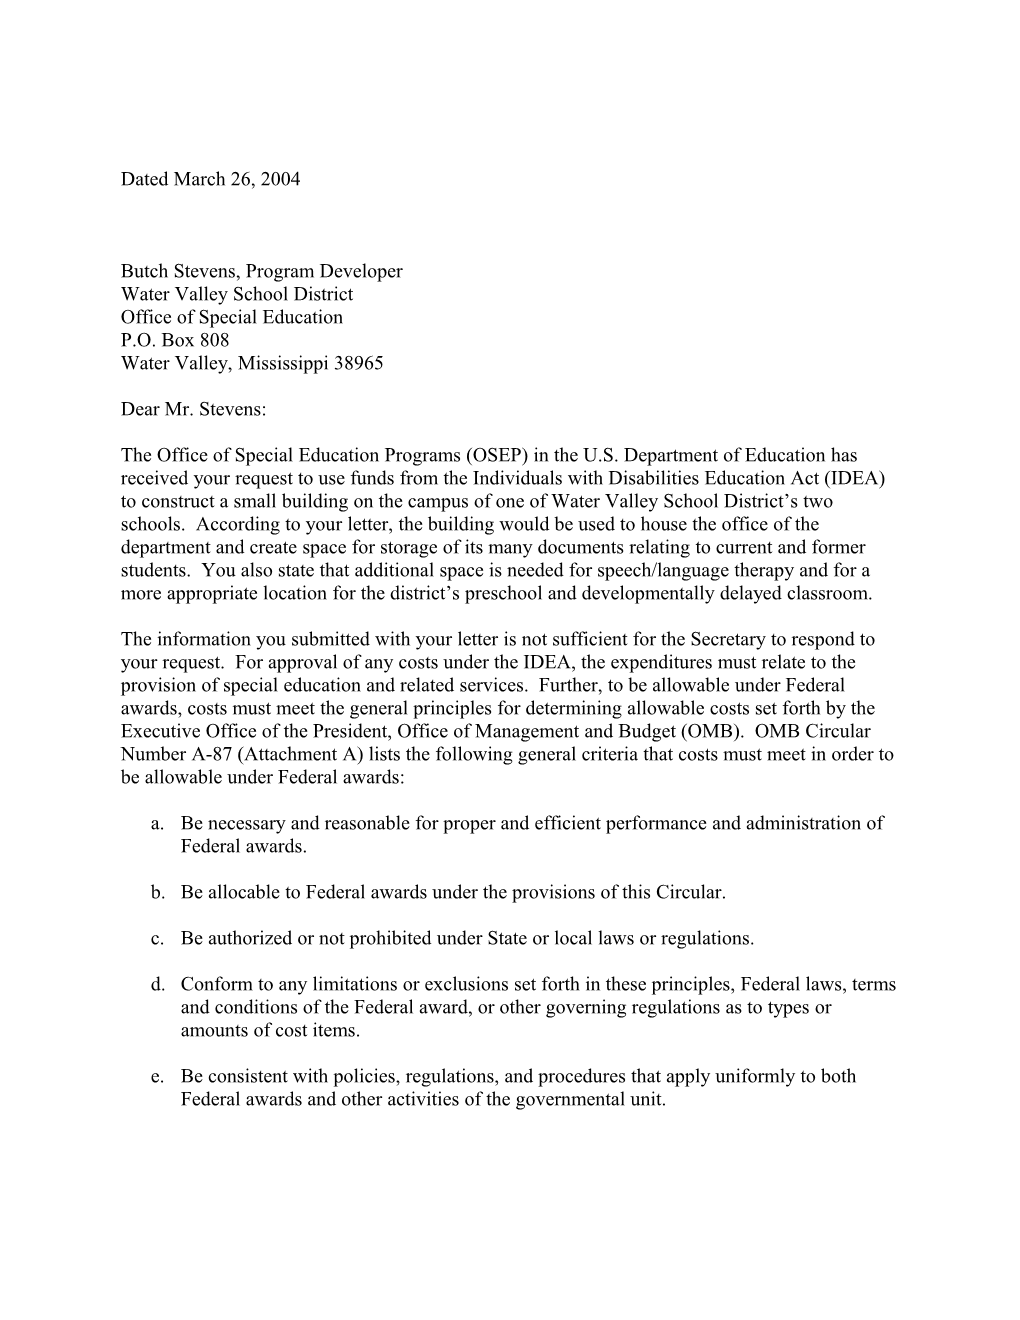 Letter Dated 03/26/04 to Stevens Re: Interpreting IDEA Or the Regulations That Implement